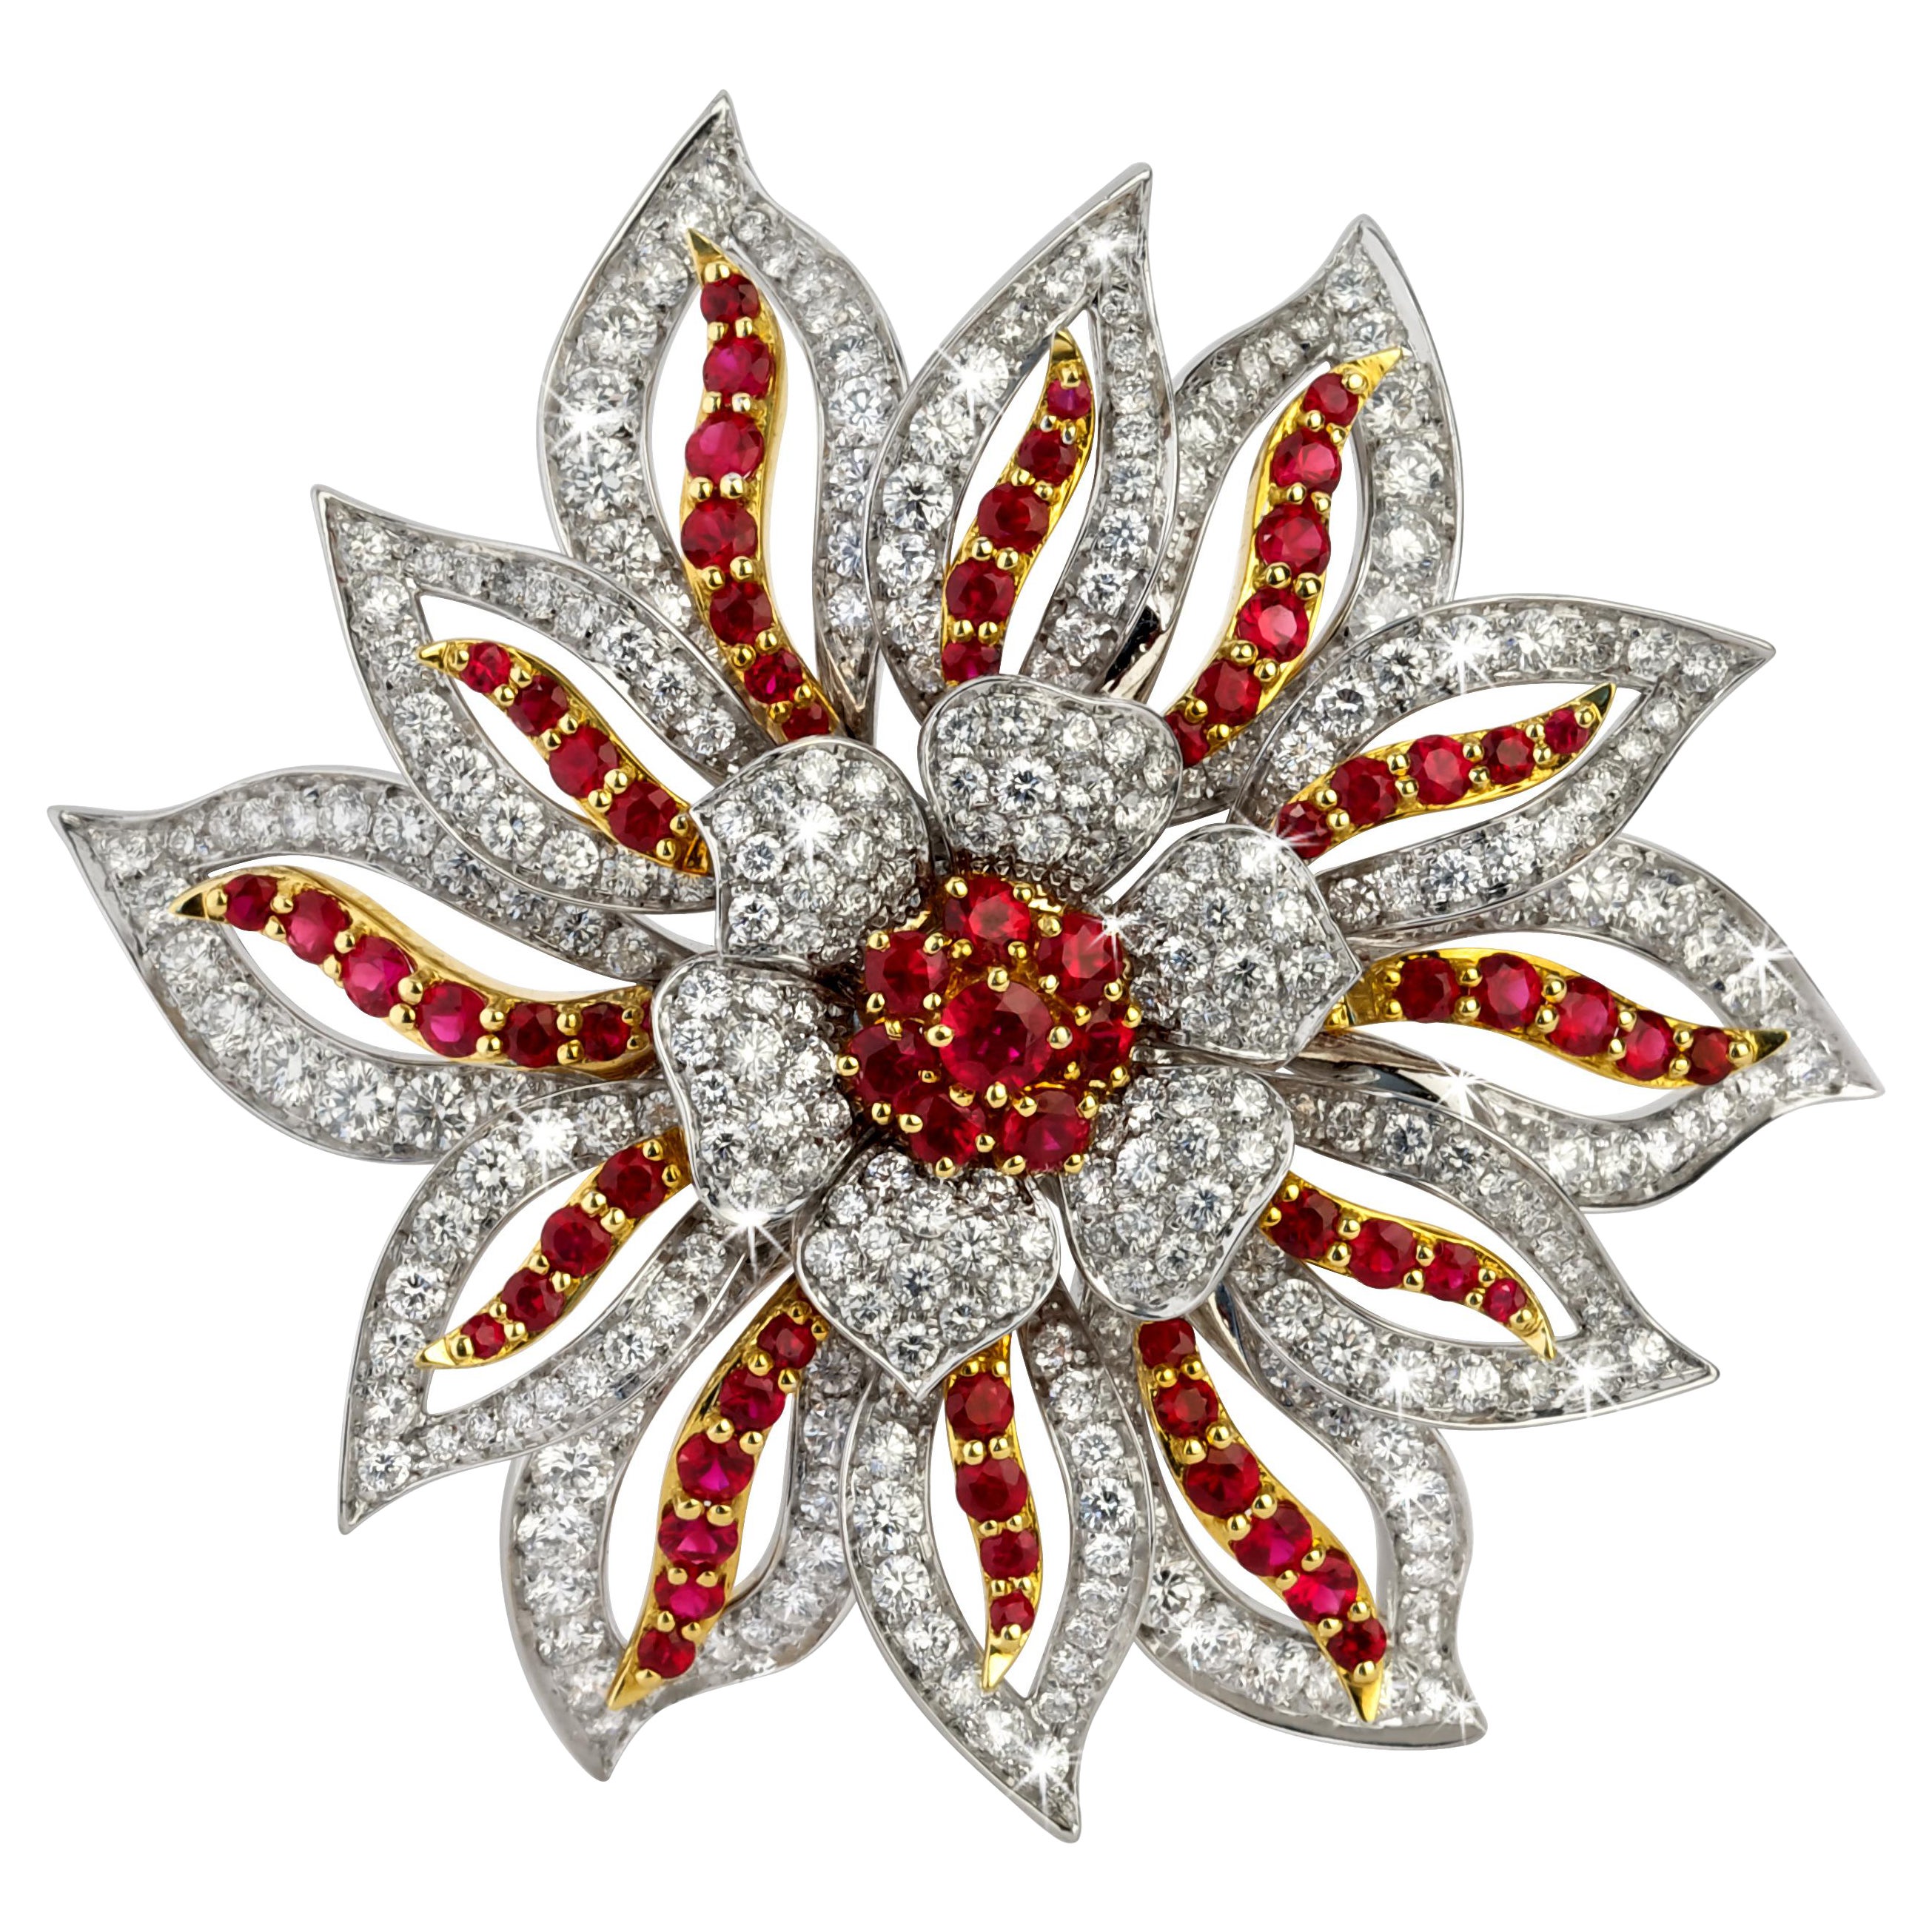 Vintage Brooch from ANGELETTI PRIVATE COLLECTION Gold with Diamonds and Rubies